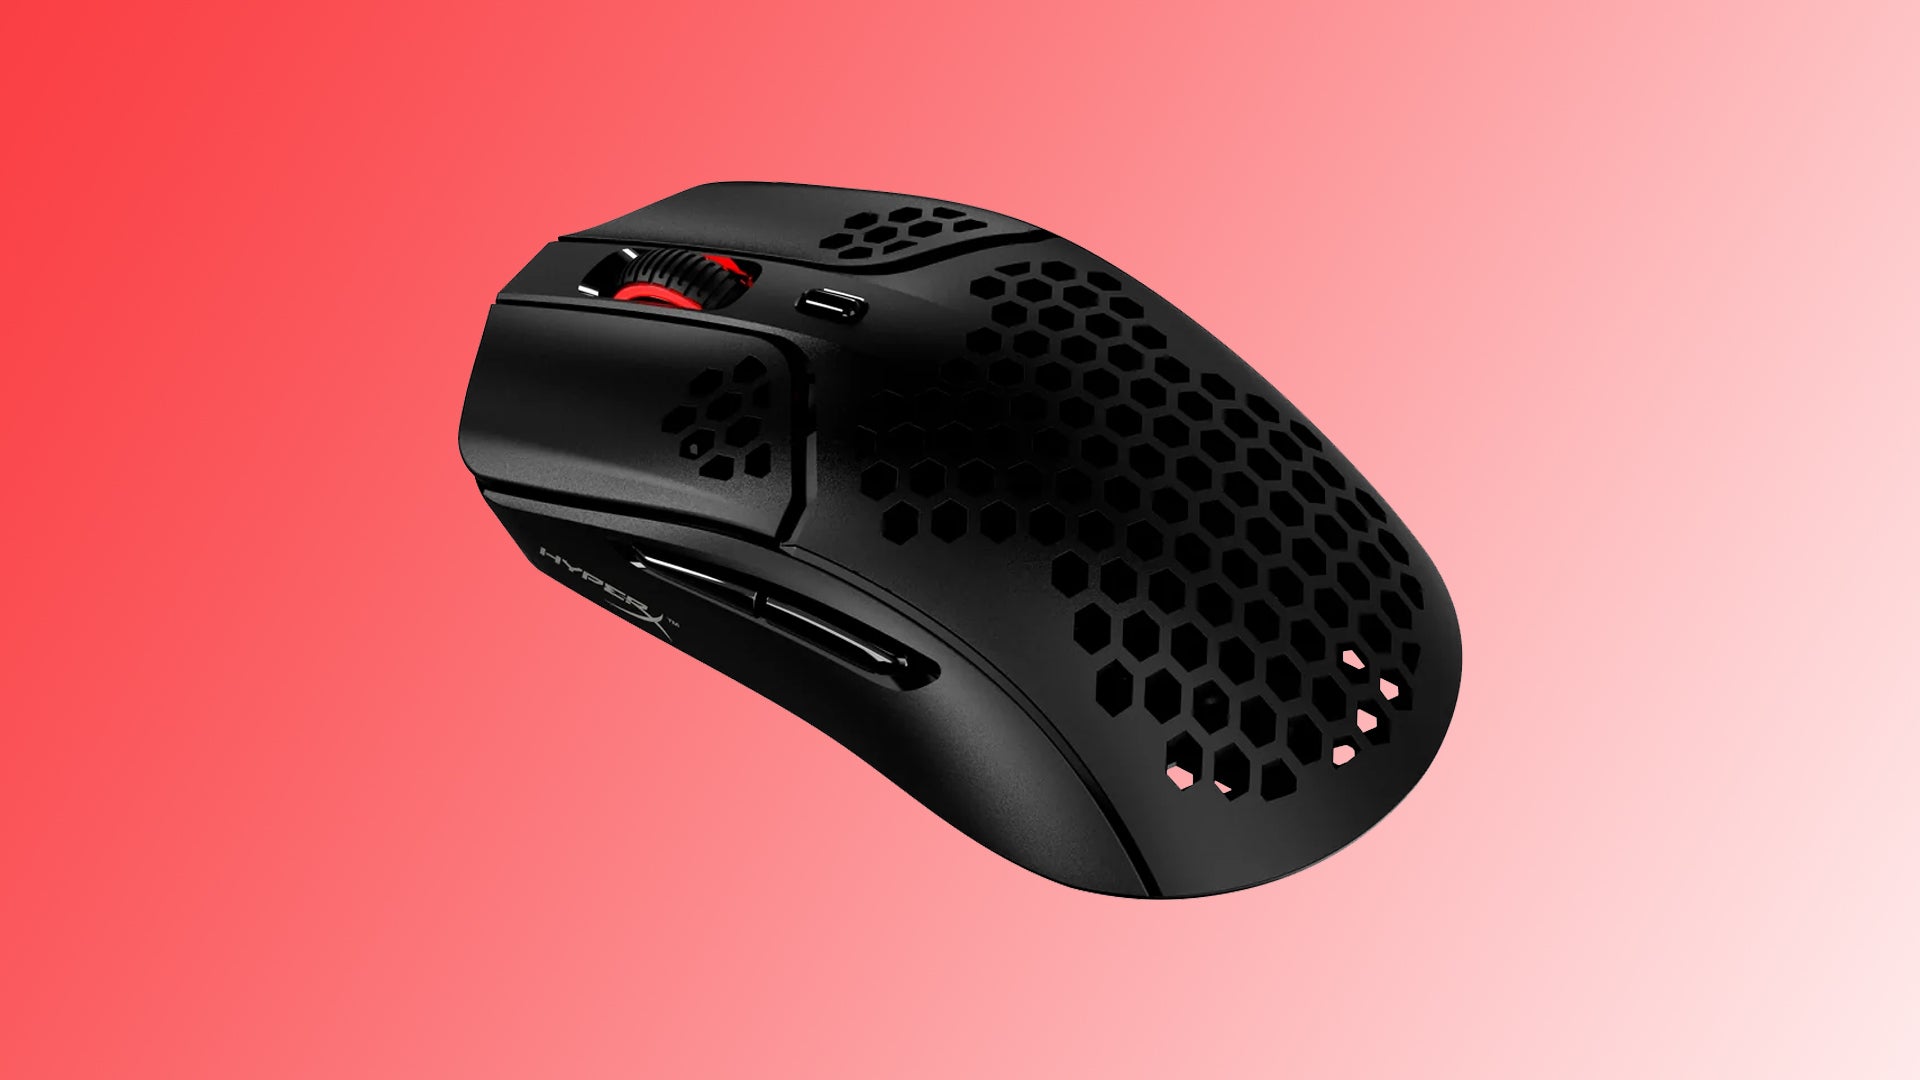 Image of a HyperX Pulsefire Haste Wireless gaming mouse on a red to white gradient background